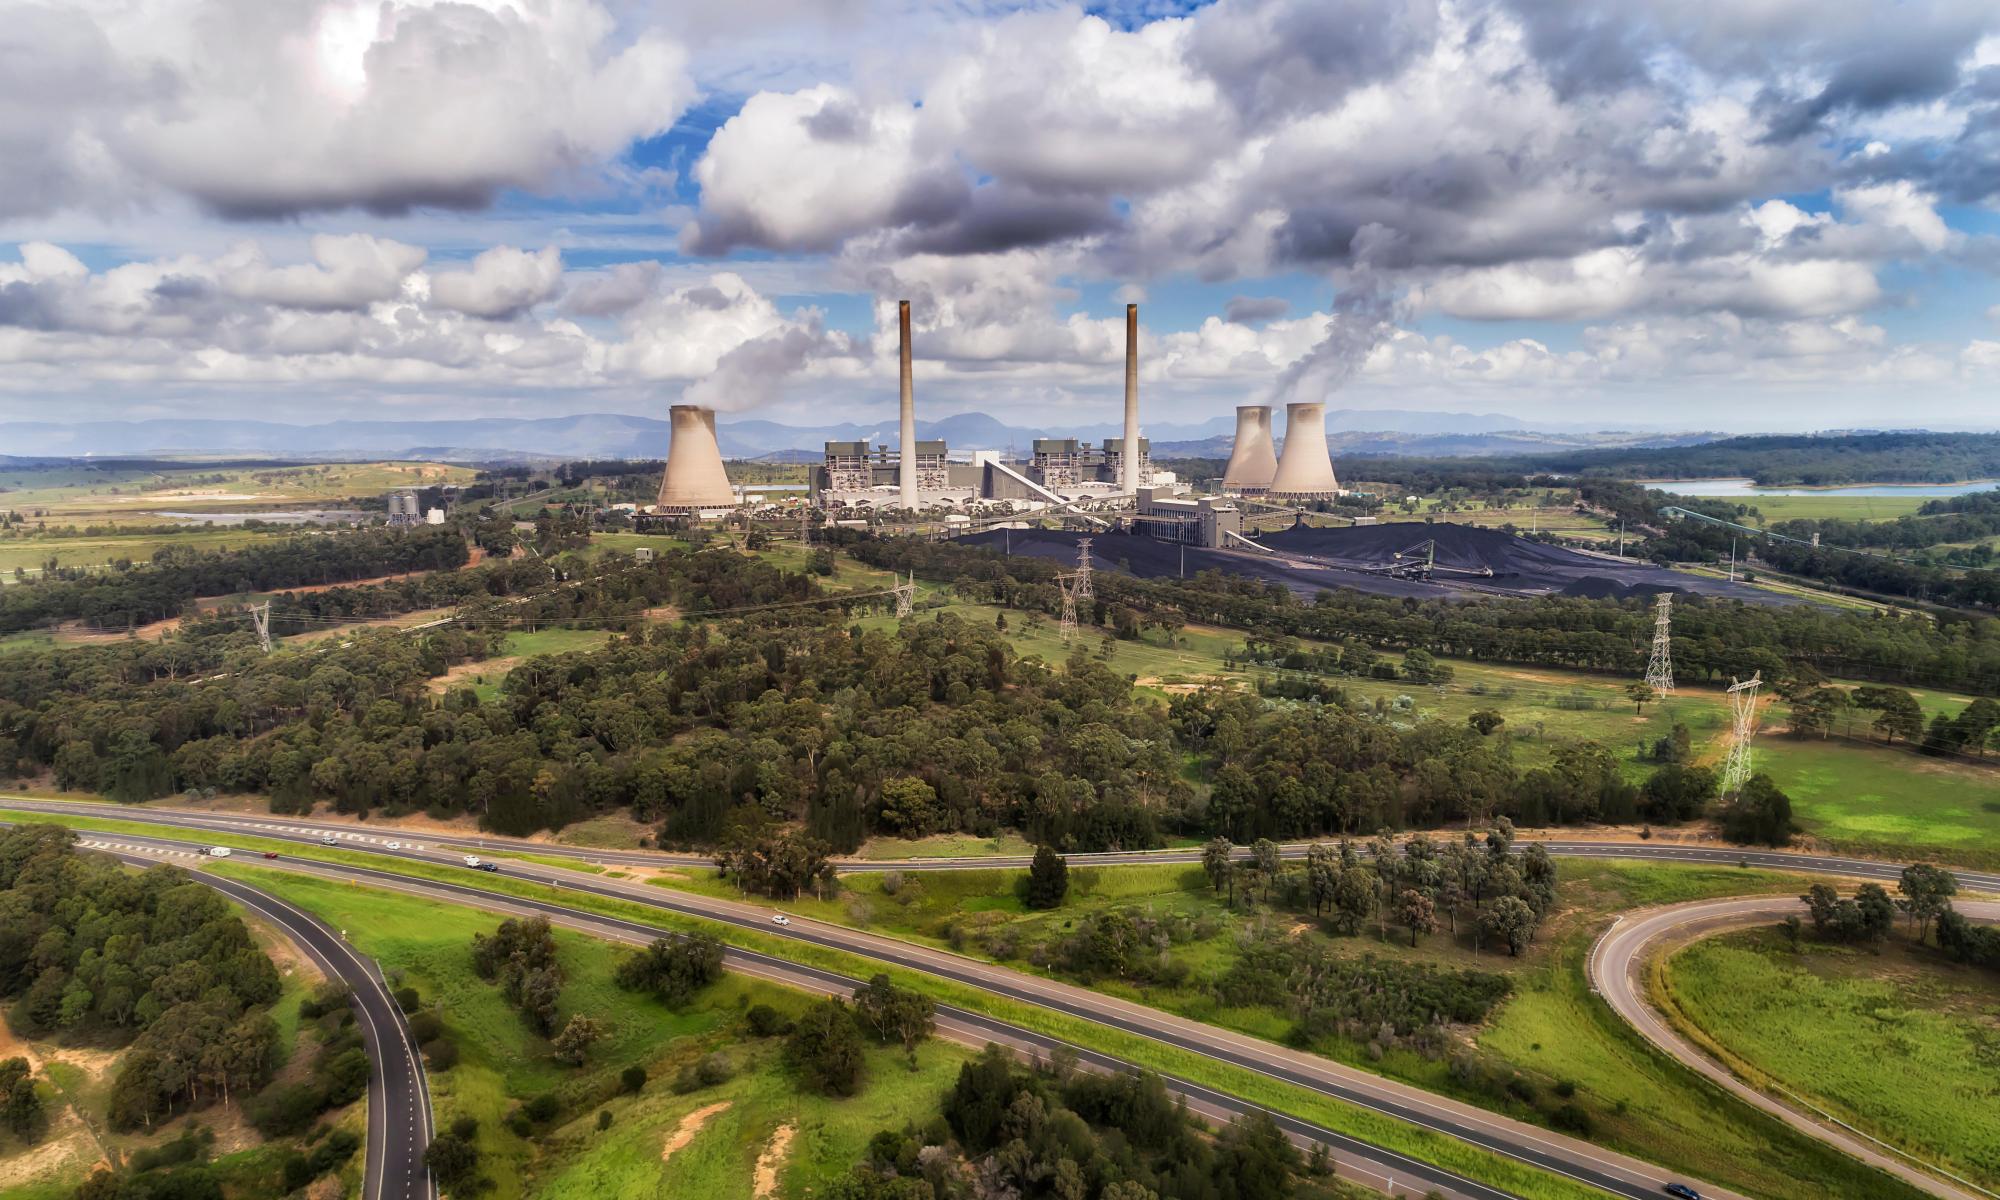 Australia's carbon emissions fall just 0.3% as industrial pollution surges